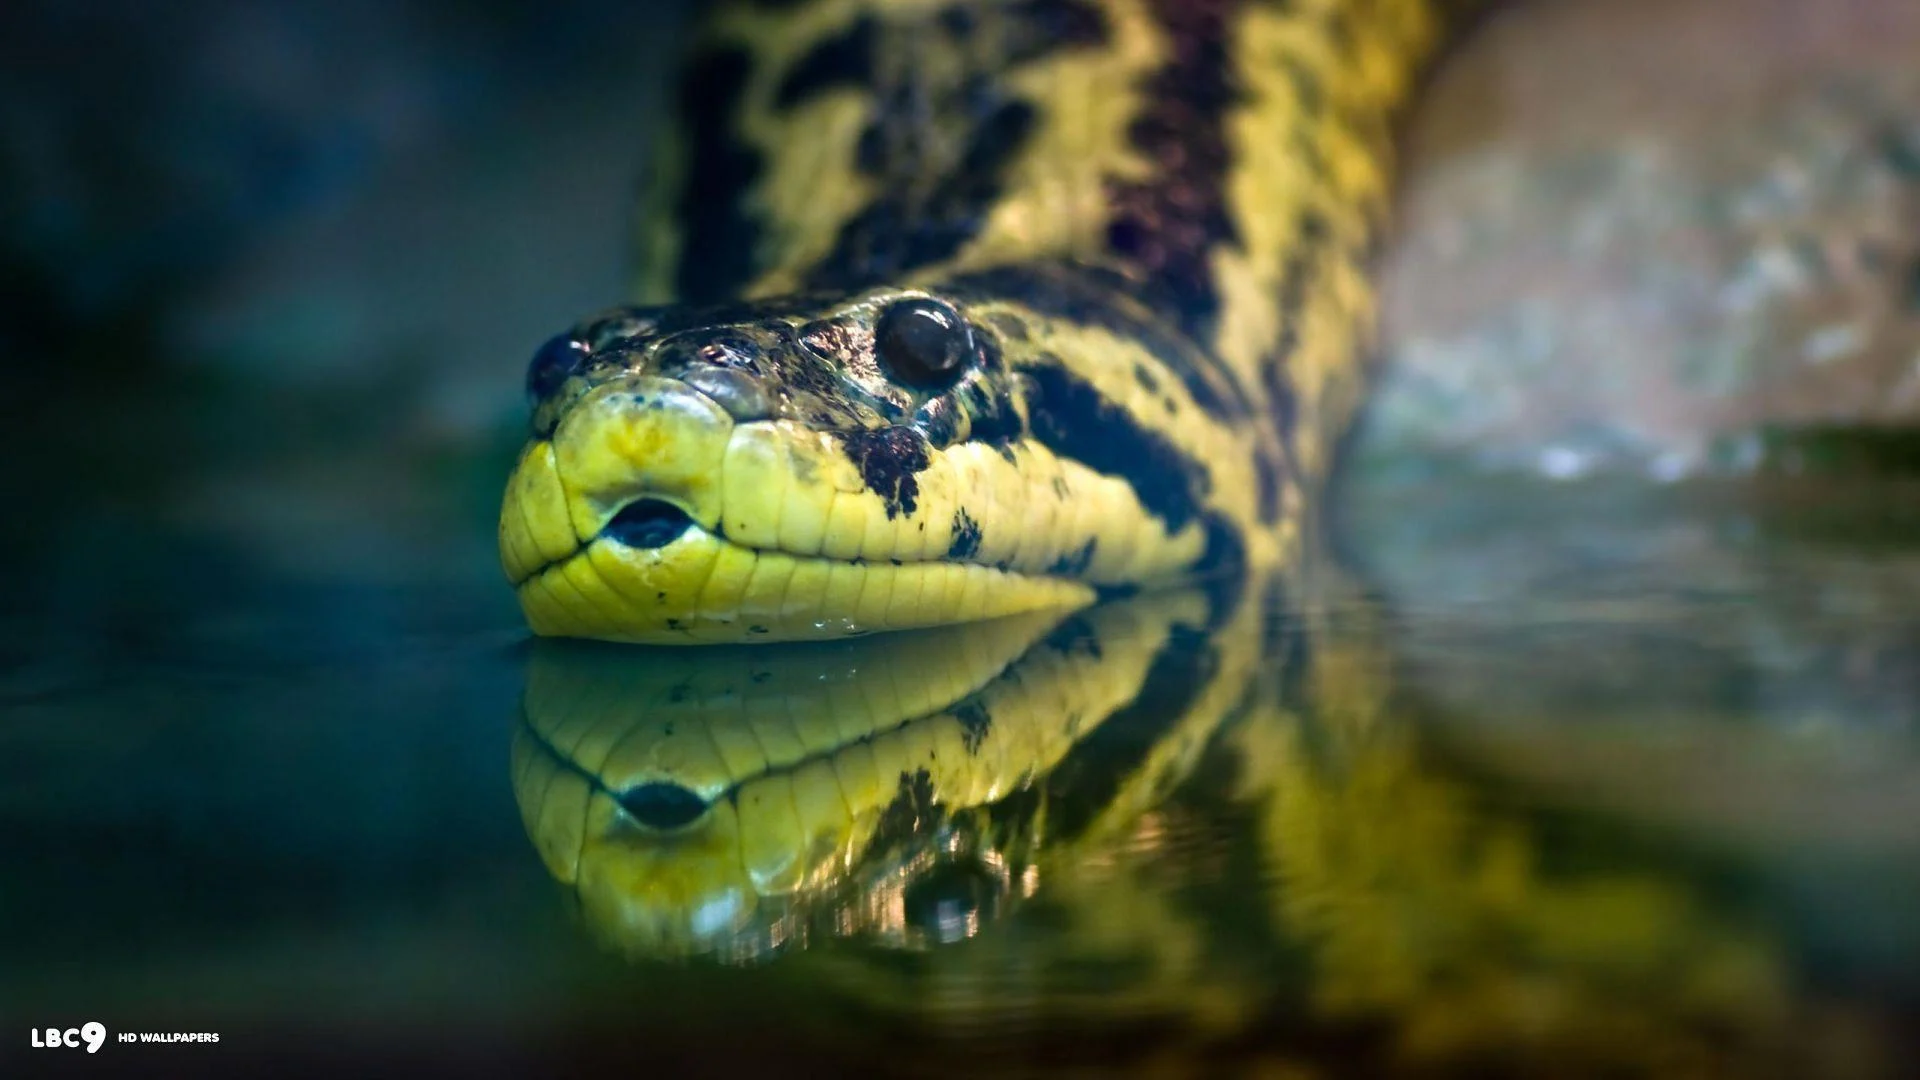 The 5 Biggest Snakes and Serpents in the World